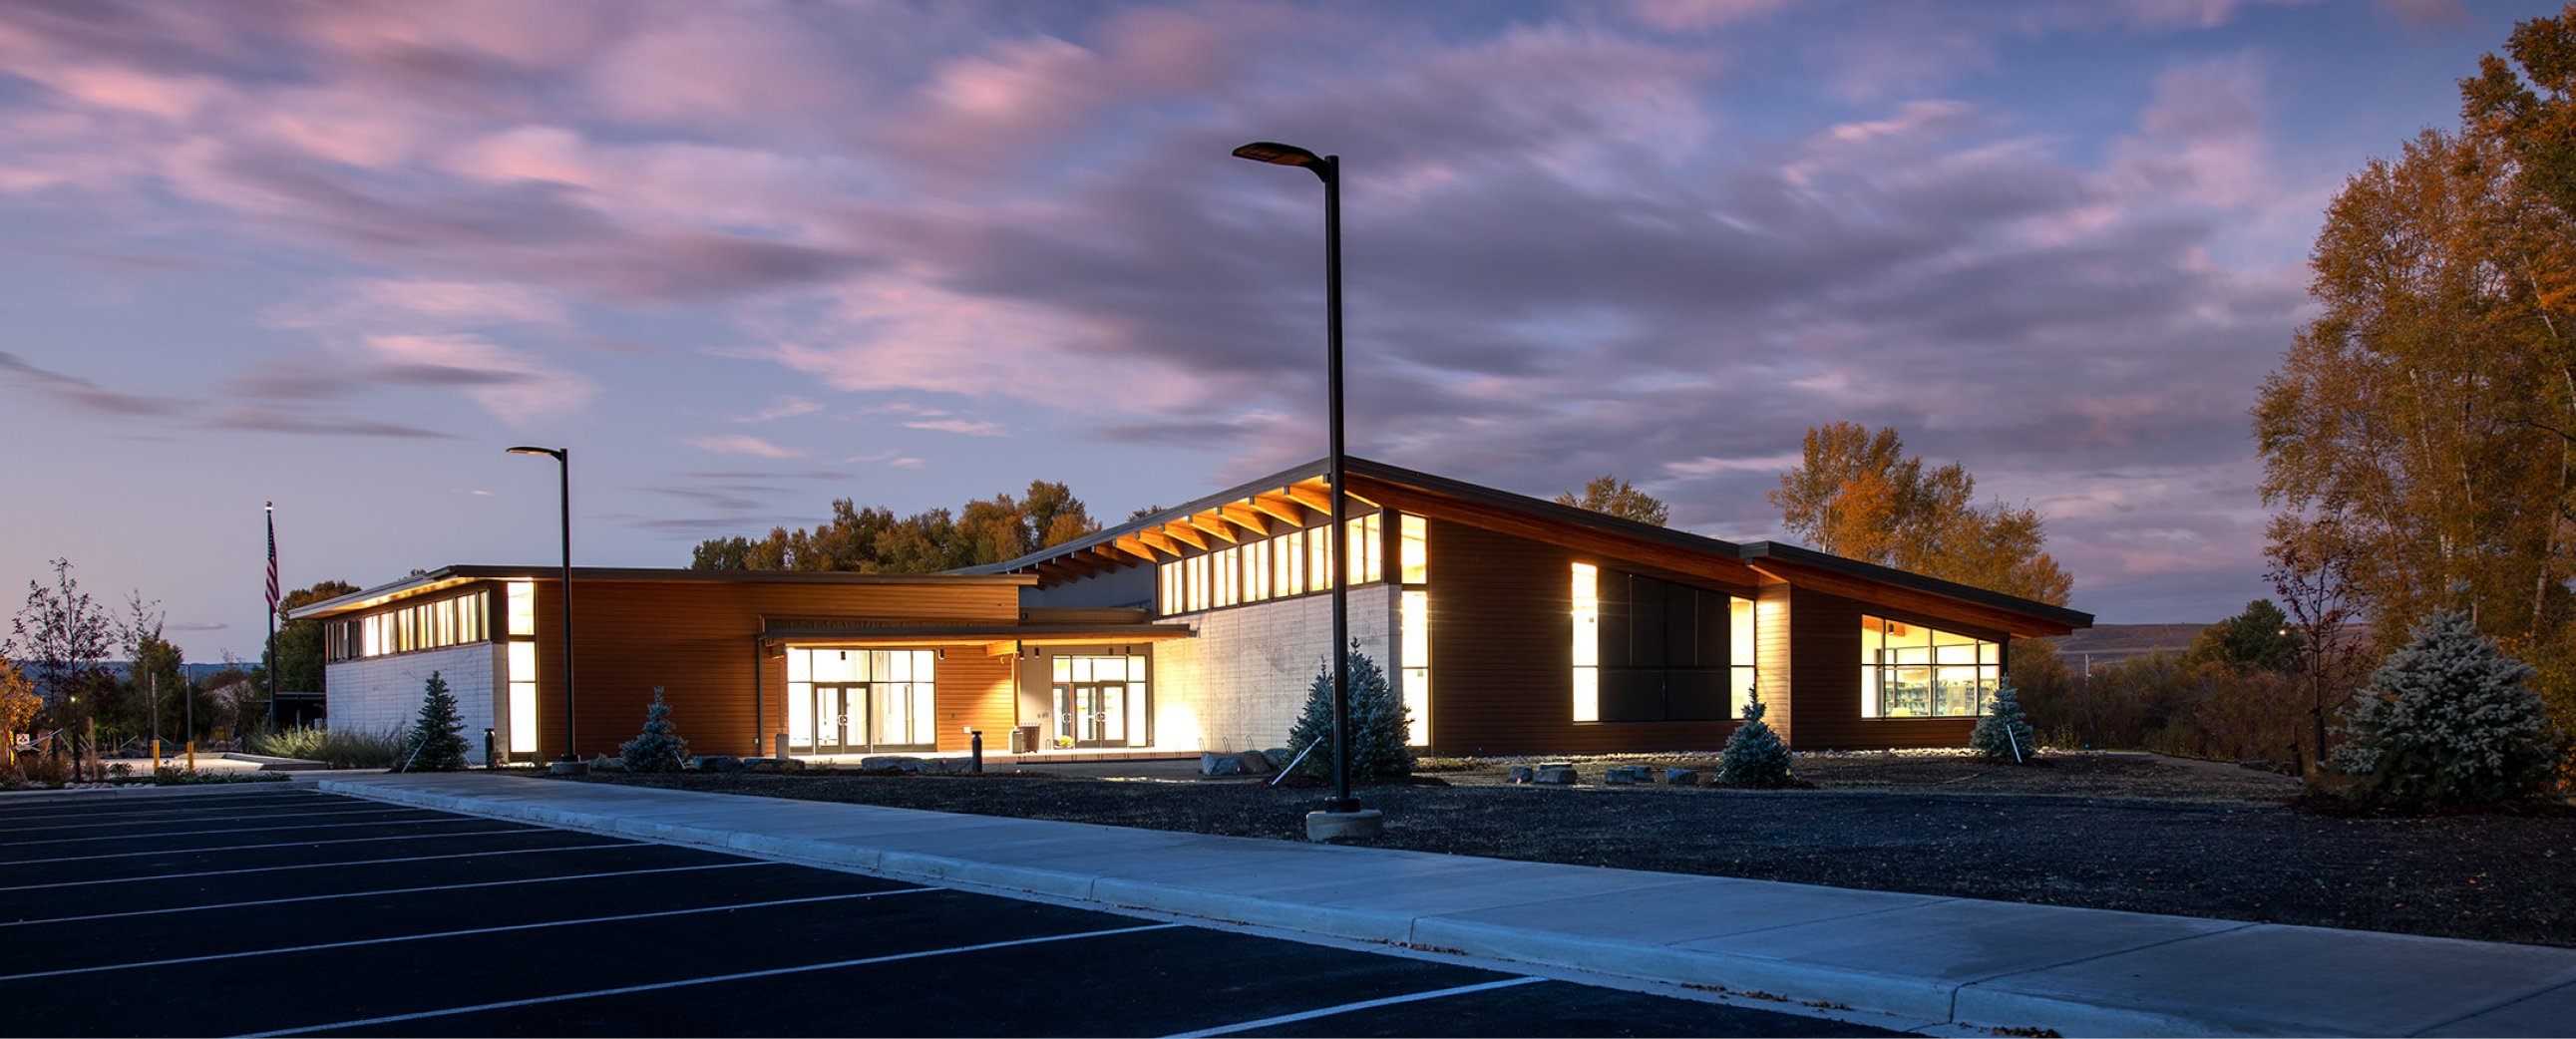 Gunnison County, Colorado Library lit building at twilight with light cloud cover.